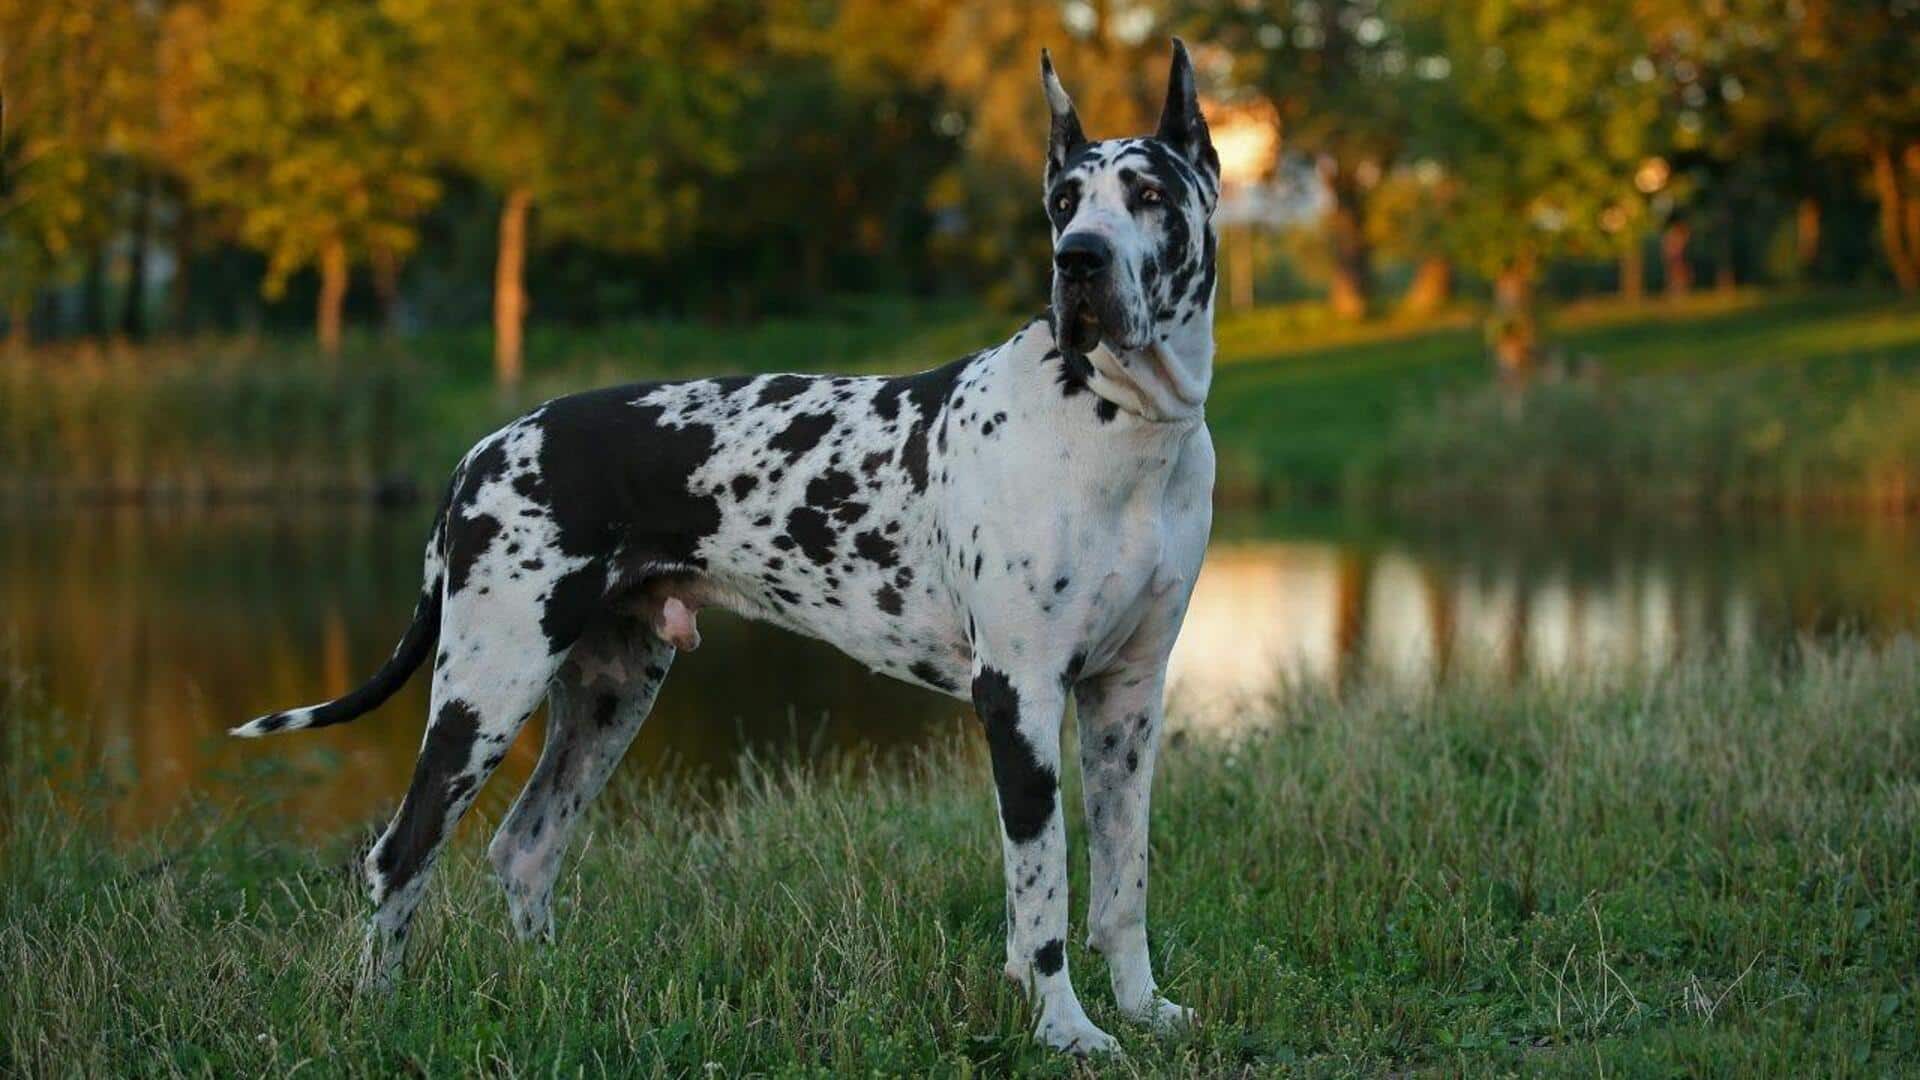 Great Dane dog's nail care: Follow these useful tips